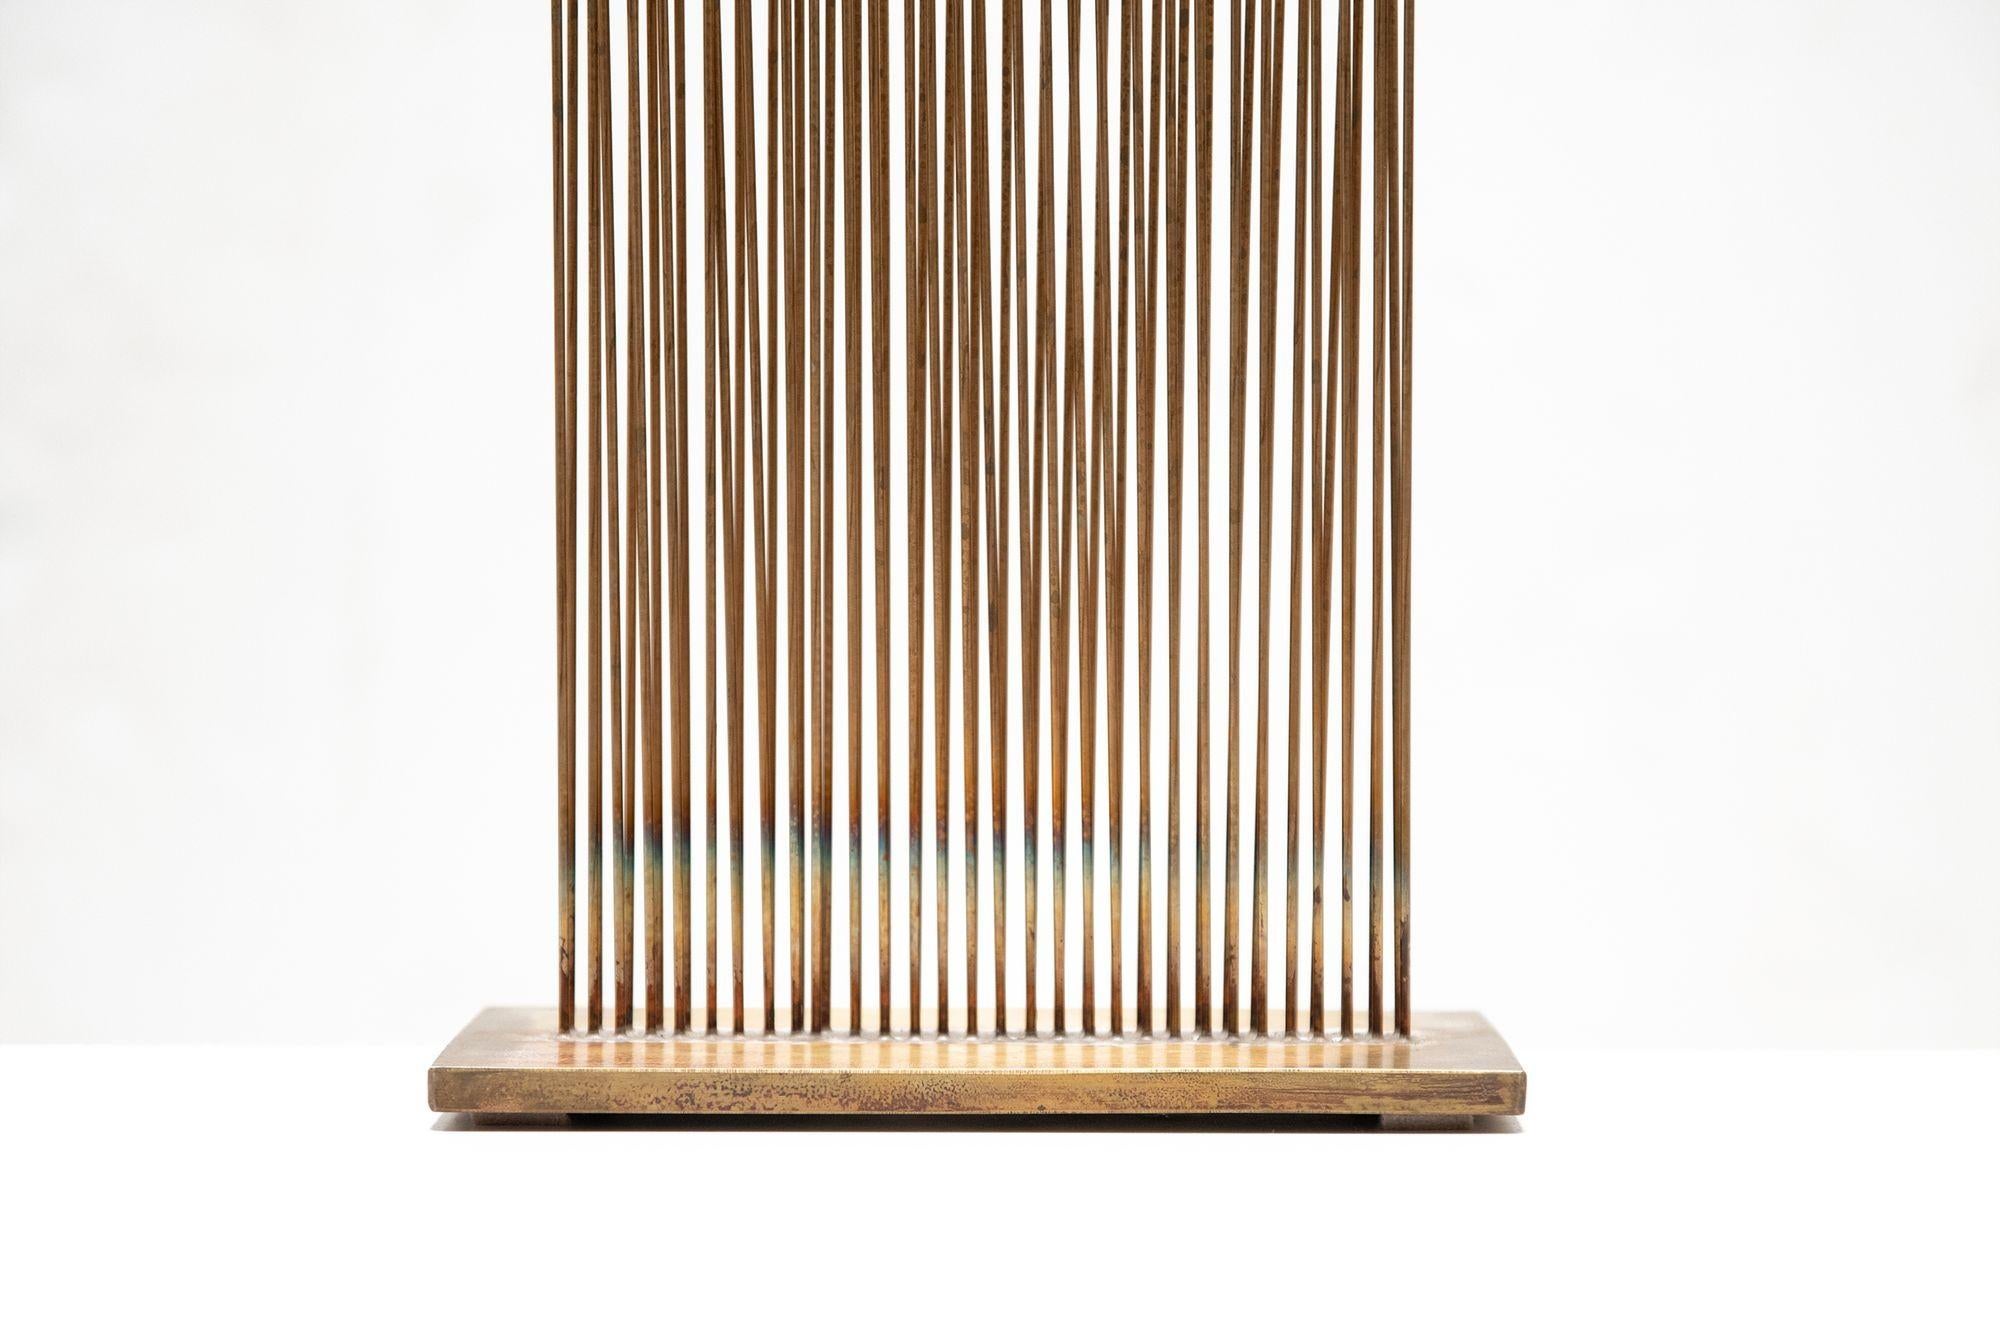 Contemporary Val Bertoia 'Sound of V' Sonambient Sculpture Silicon Bronze Rods in Brass Base For Sale